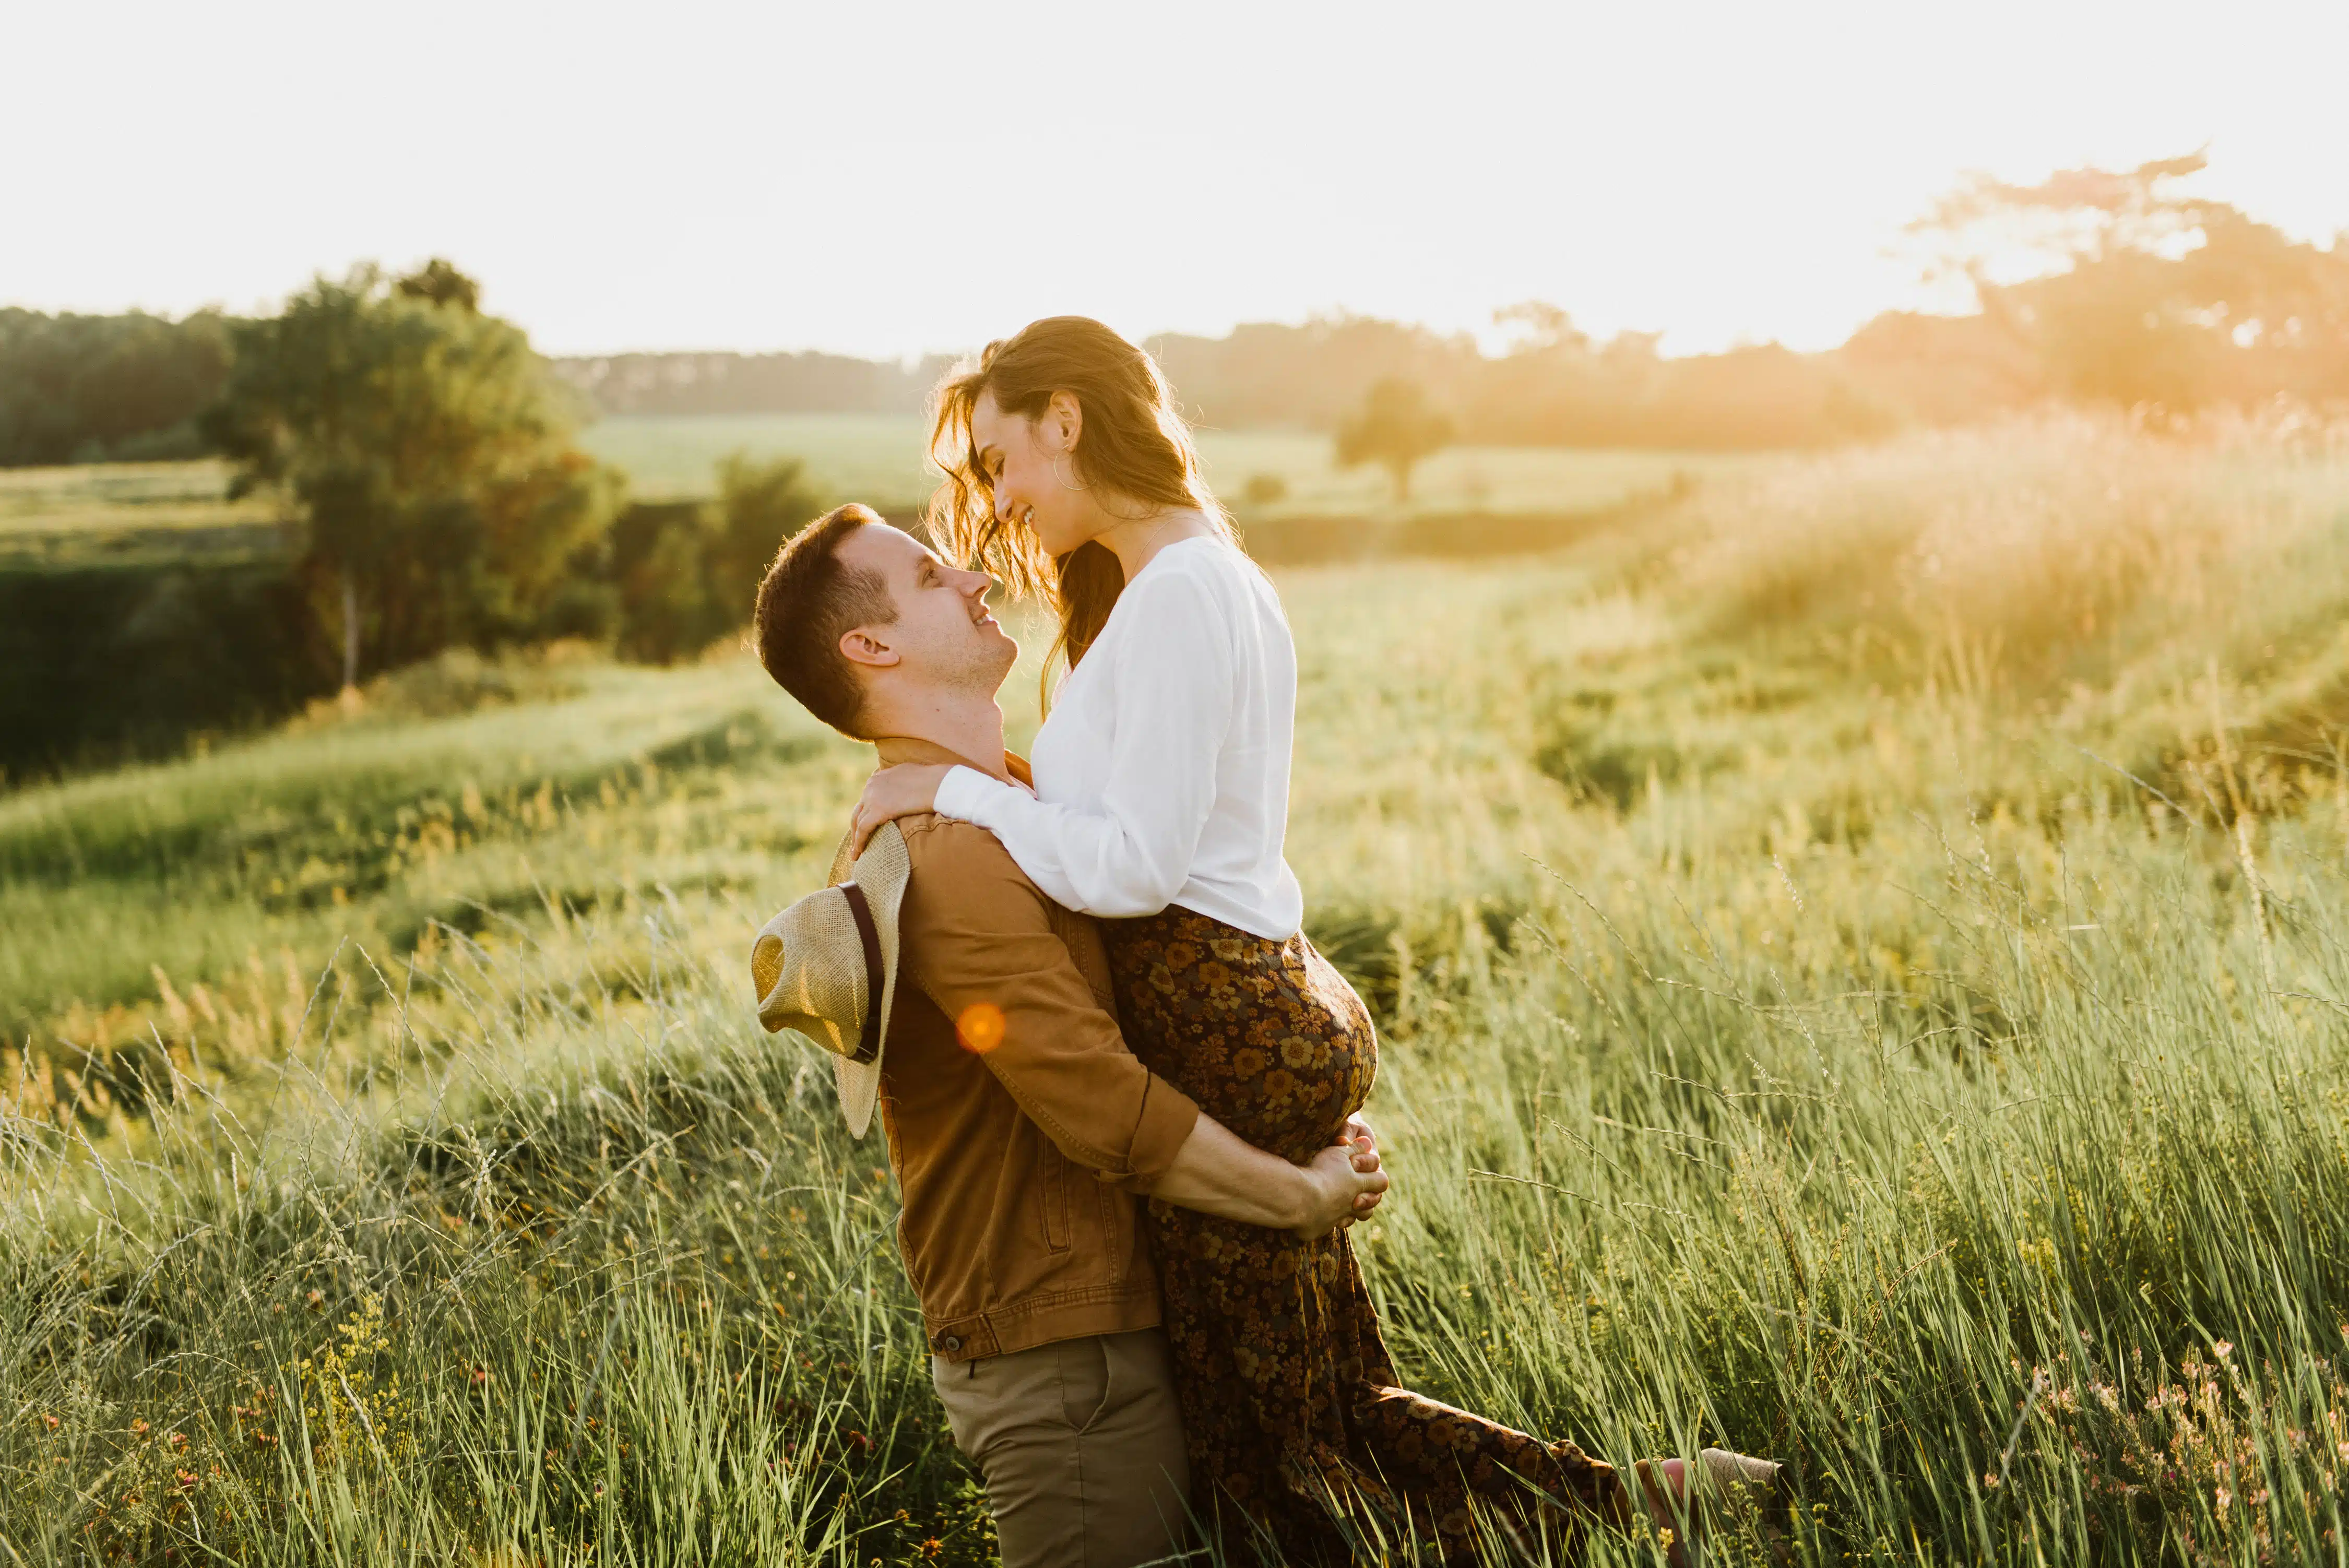 Beautiful young woman and a man walk, hug and kiss in nature at sunset.